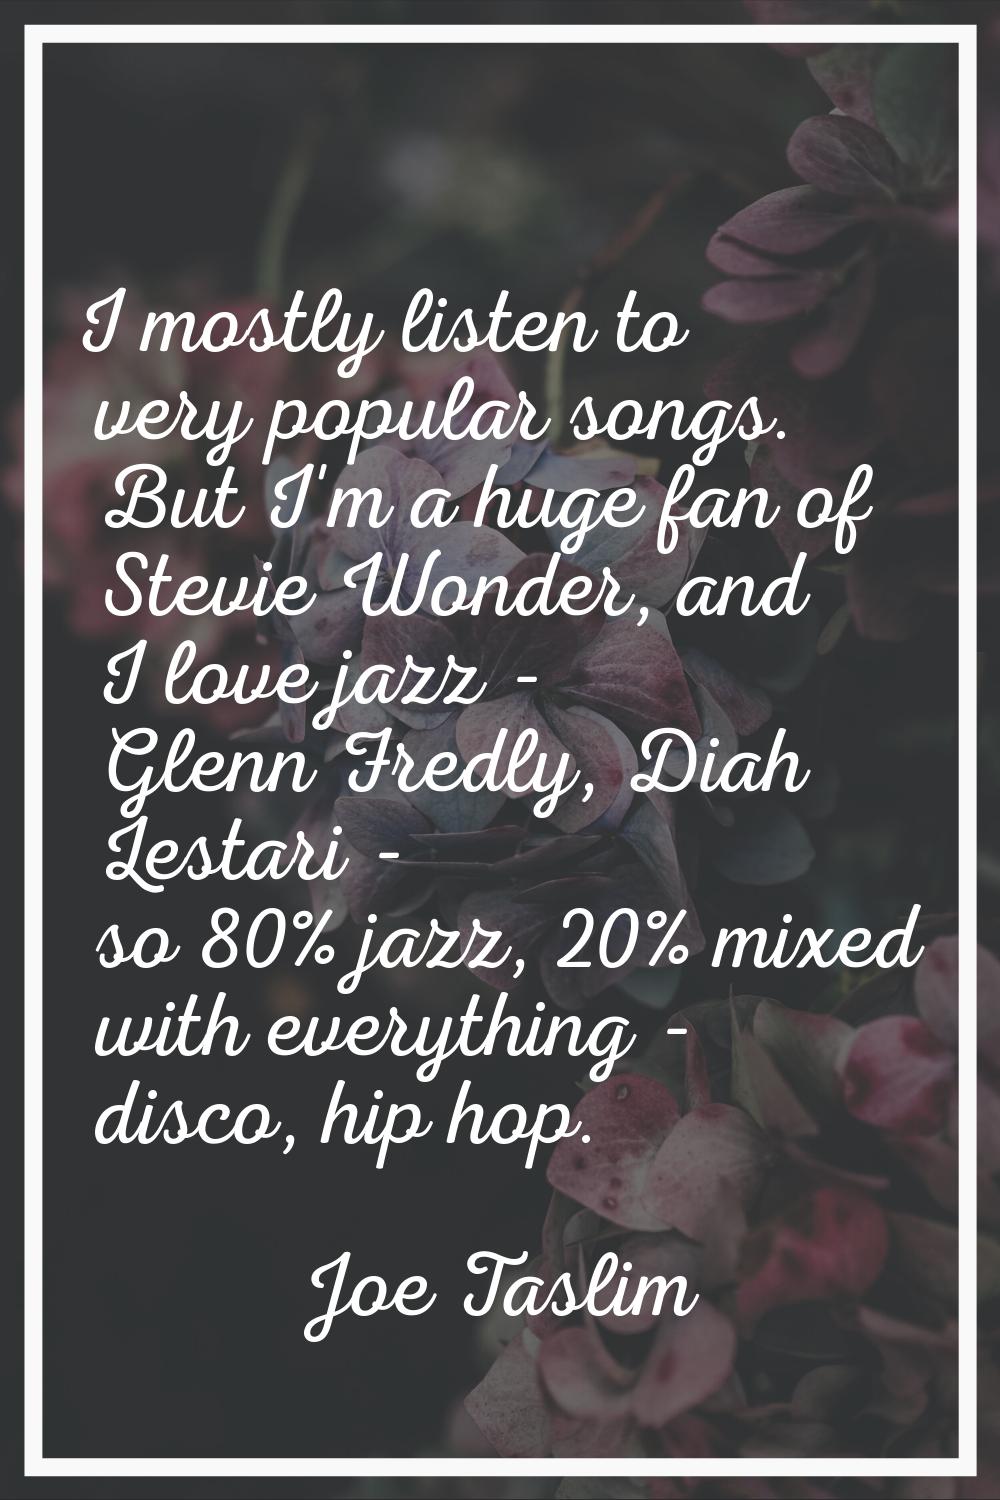 I mostly listen to very popular songs. But I'm a huge fan of Stevie Wonder, and I love jazz - Glenn